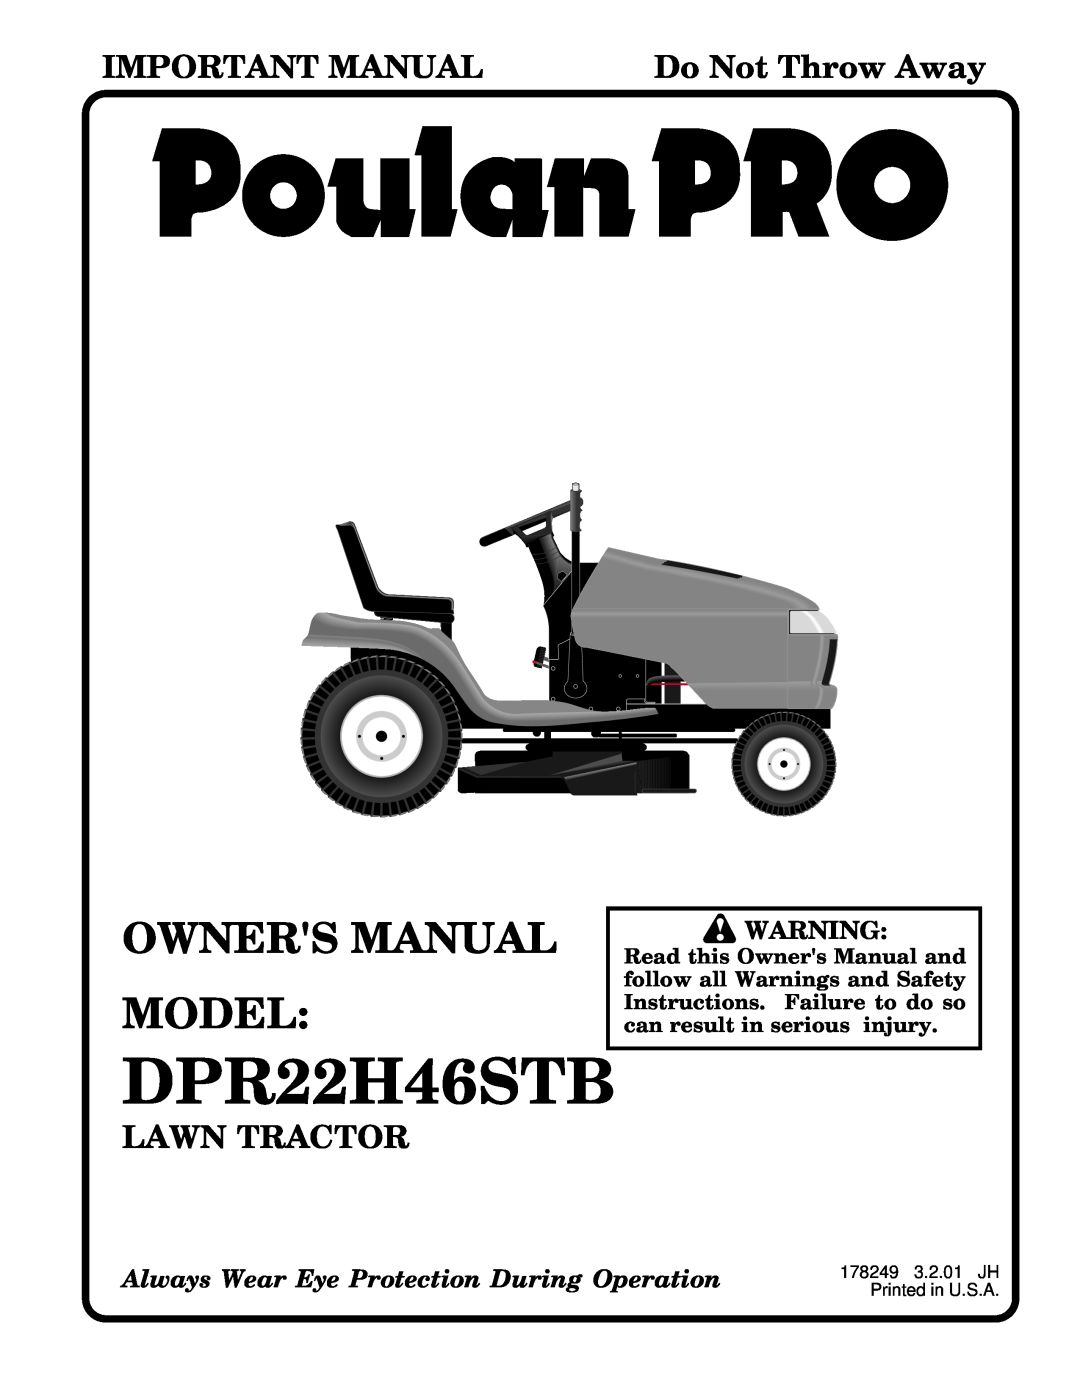 Poulan 178249 owner manual DPR22H46STB, Important Manual, Do Not Throw Away, Lawn Tractor 